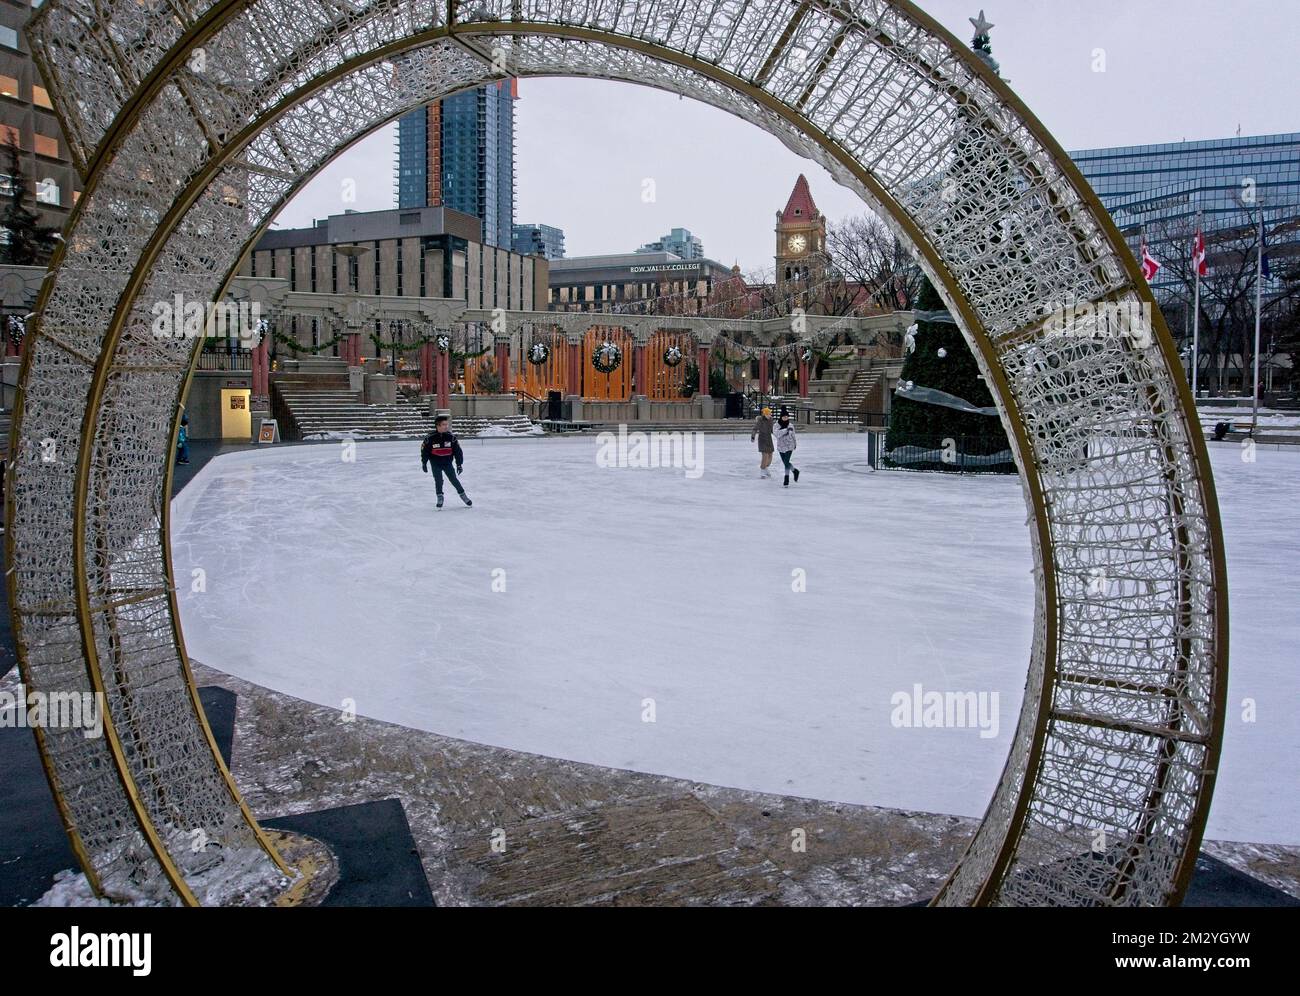 Patinage sur glace Olympic Plaza Calgary Banque D'Images